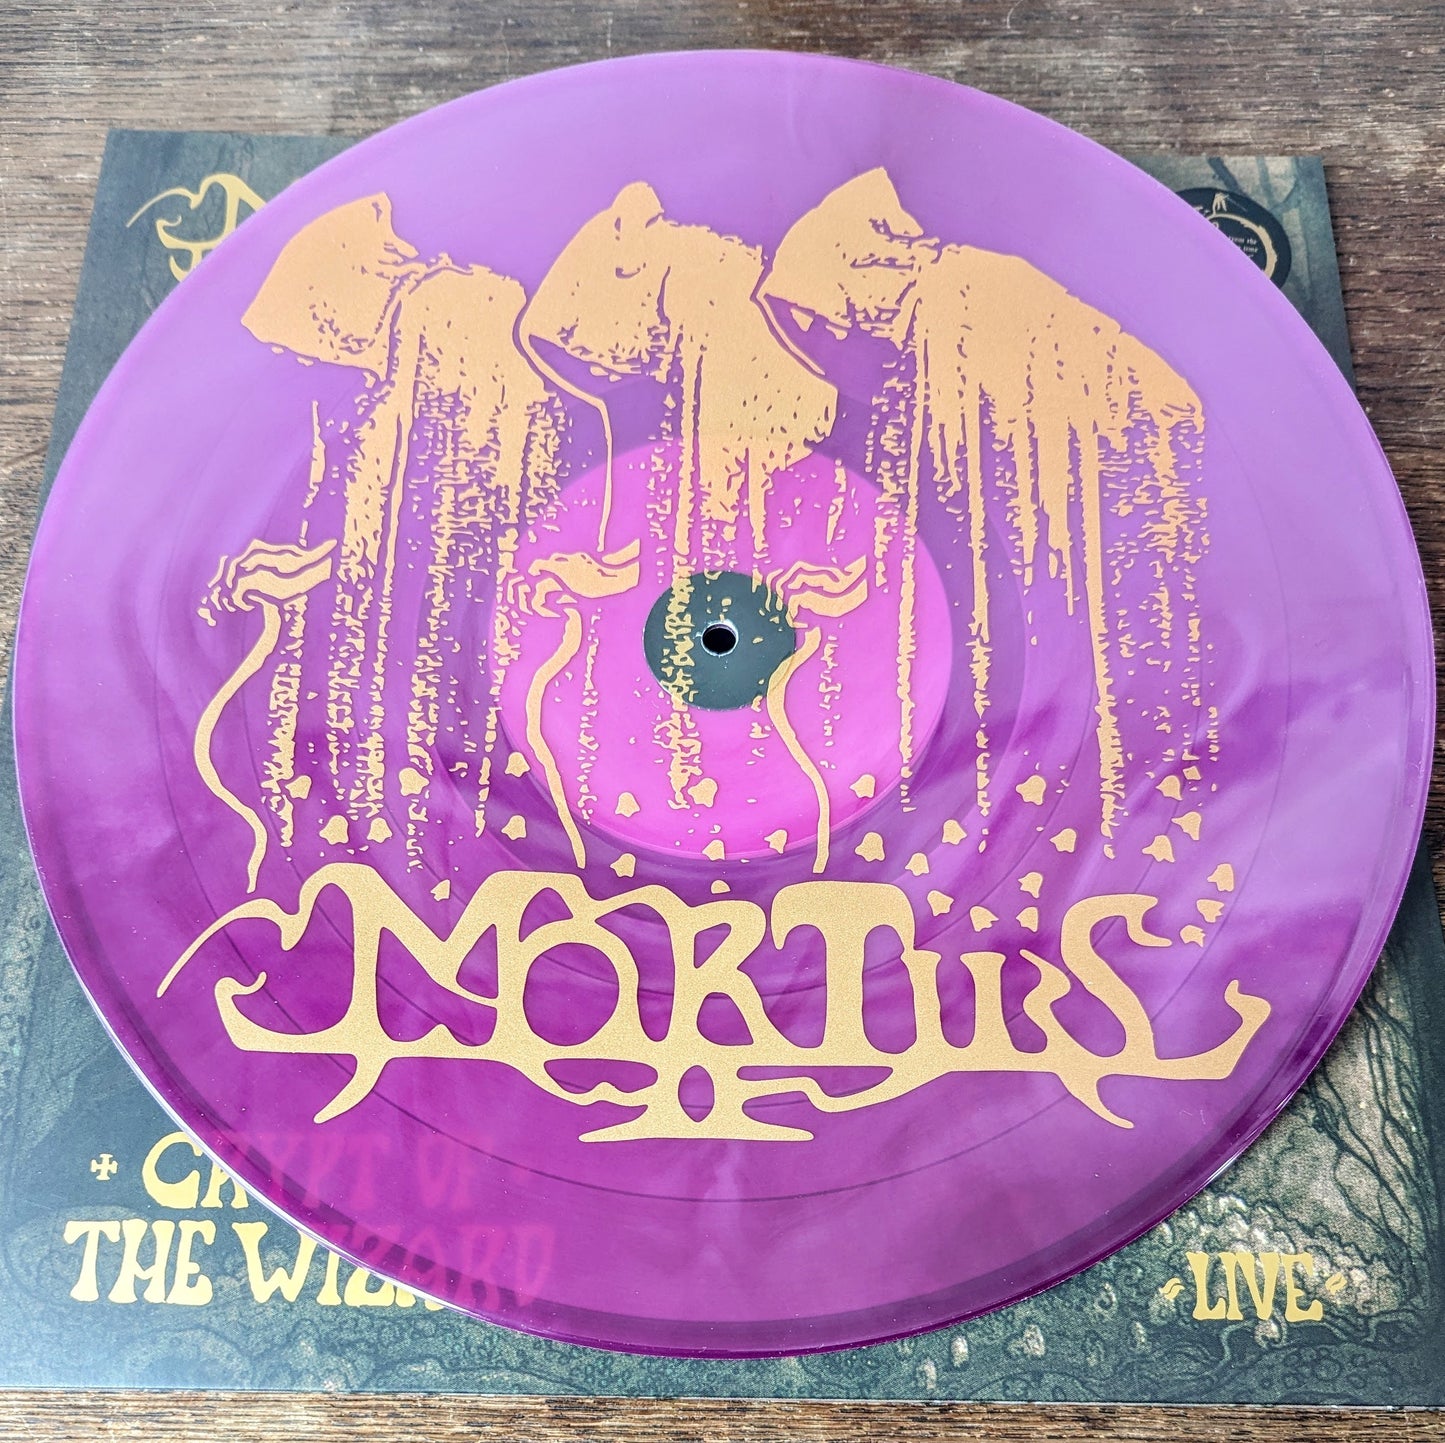 MORTIIS "Crypt of the Wizard (Live)" Deluxe 2xLP vinyl (gatefold, gold print, screenprint D-side, poster)